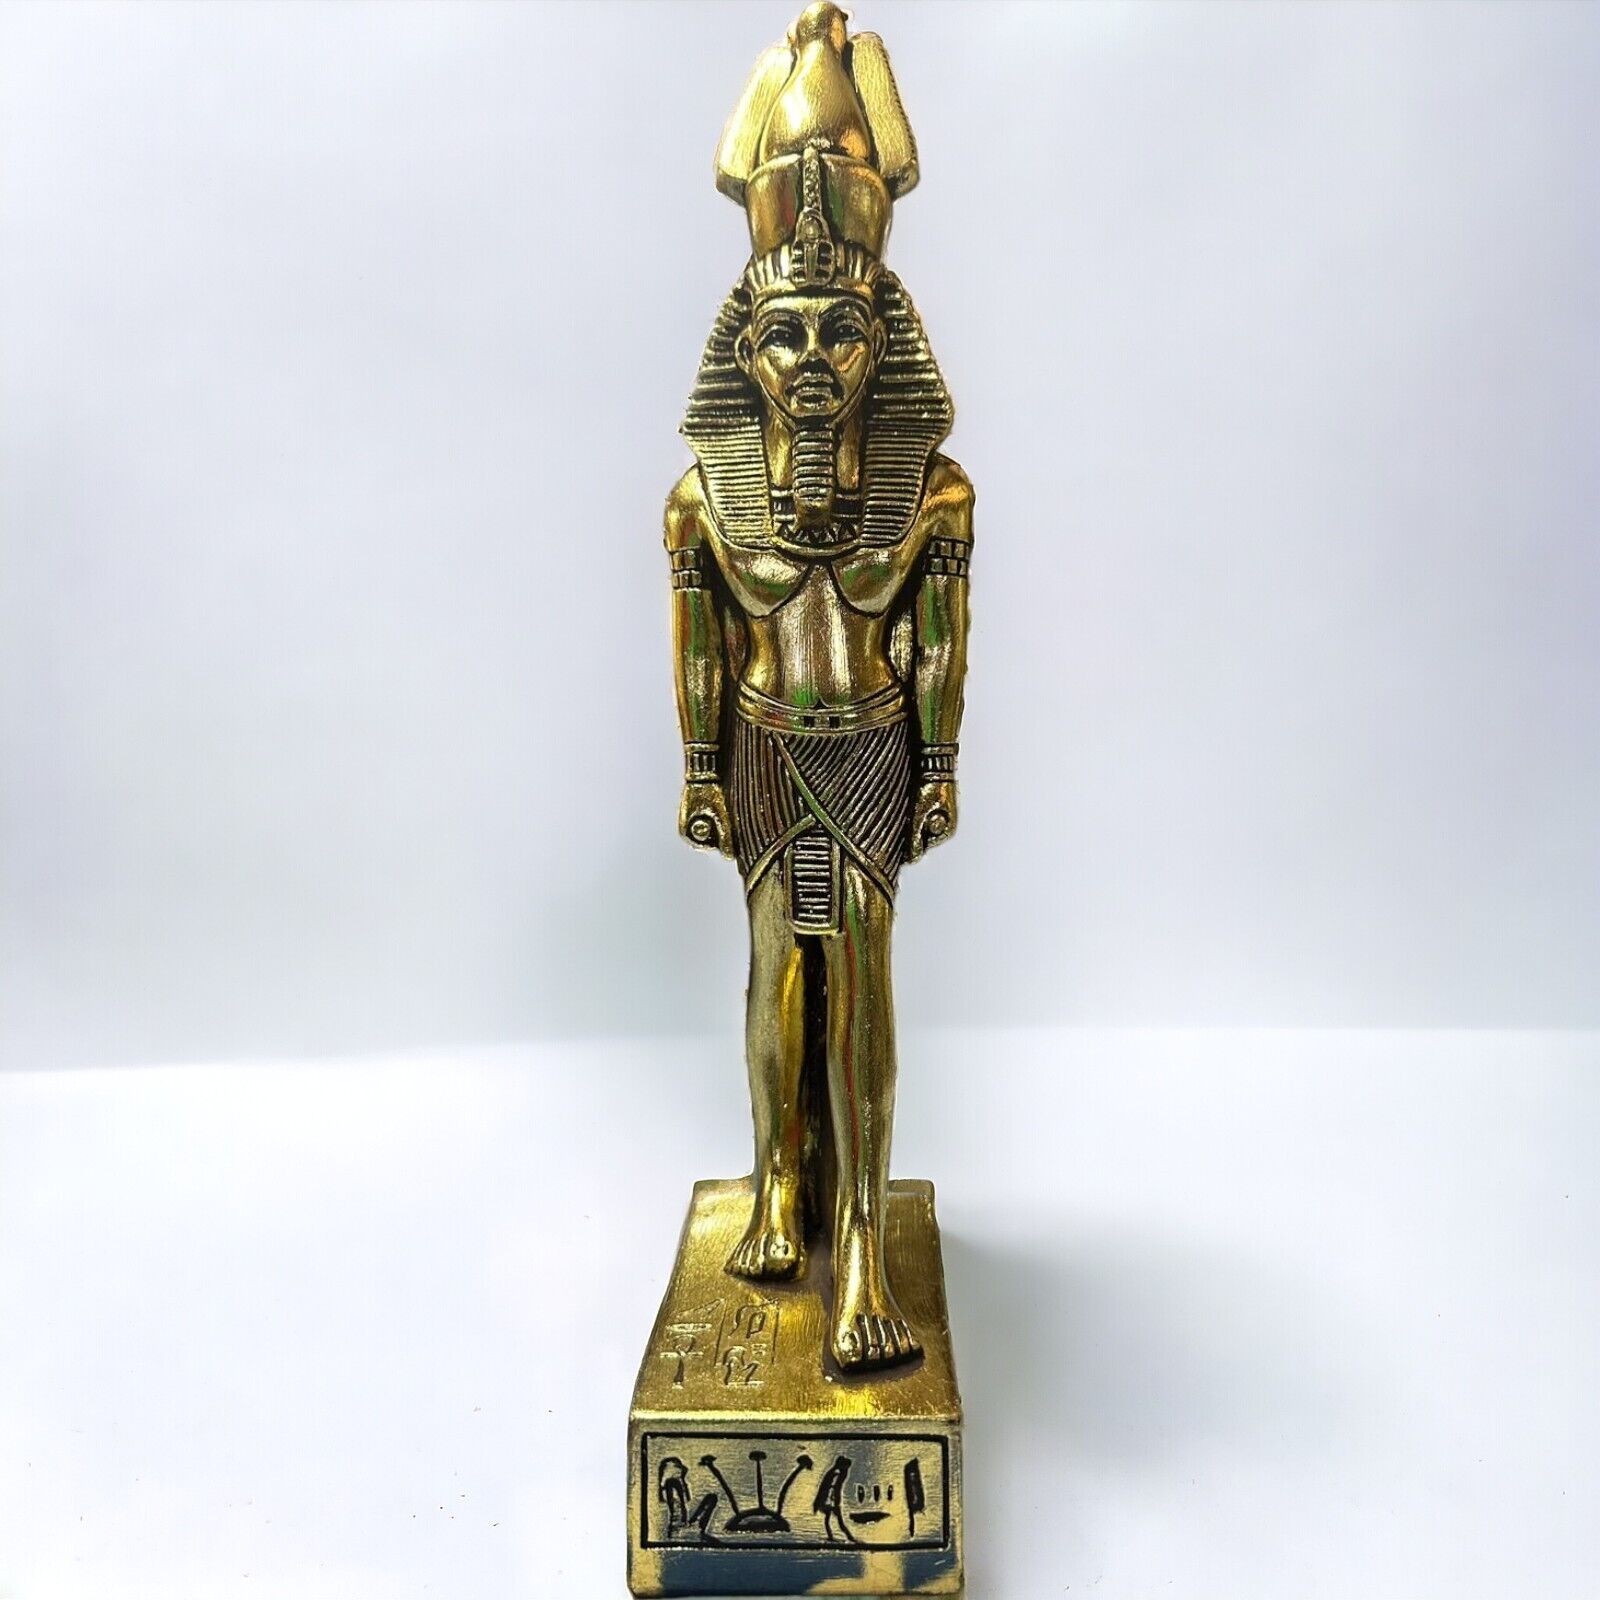 UNIQUE ANCIENT EGYPTIAN ANTIQUES Golden Statue Large Of King Ramses II Egypt BC